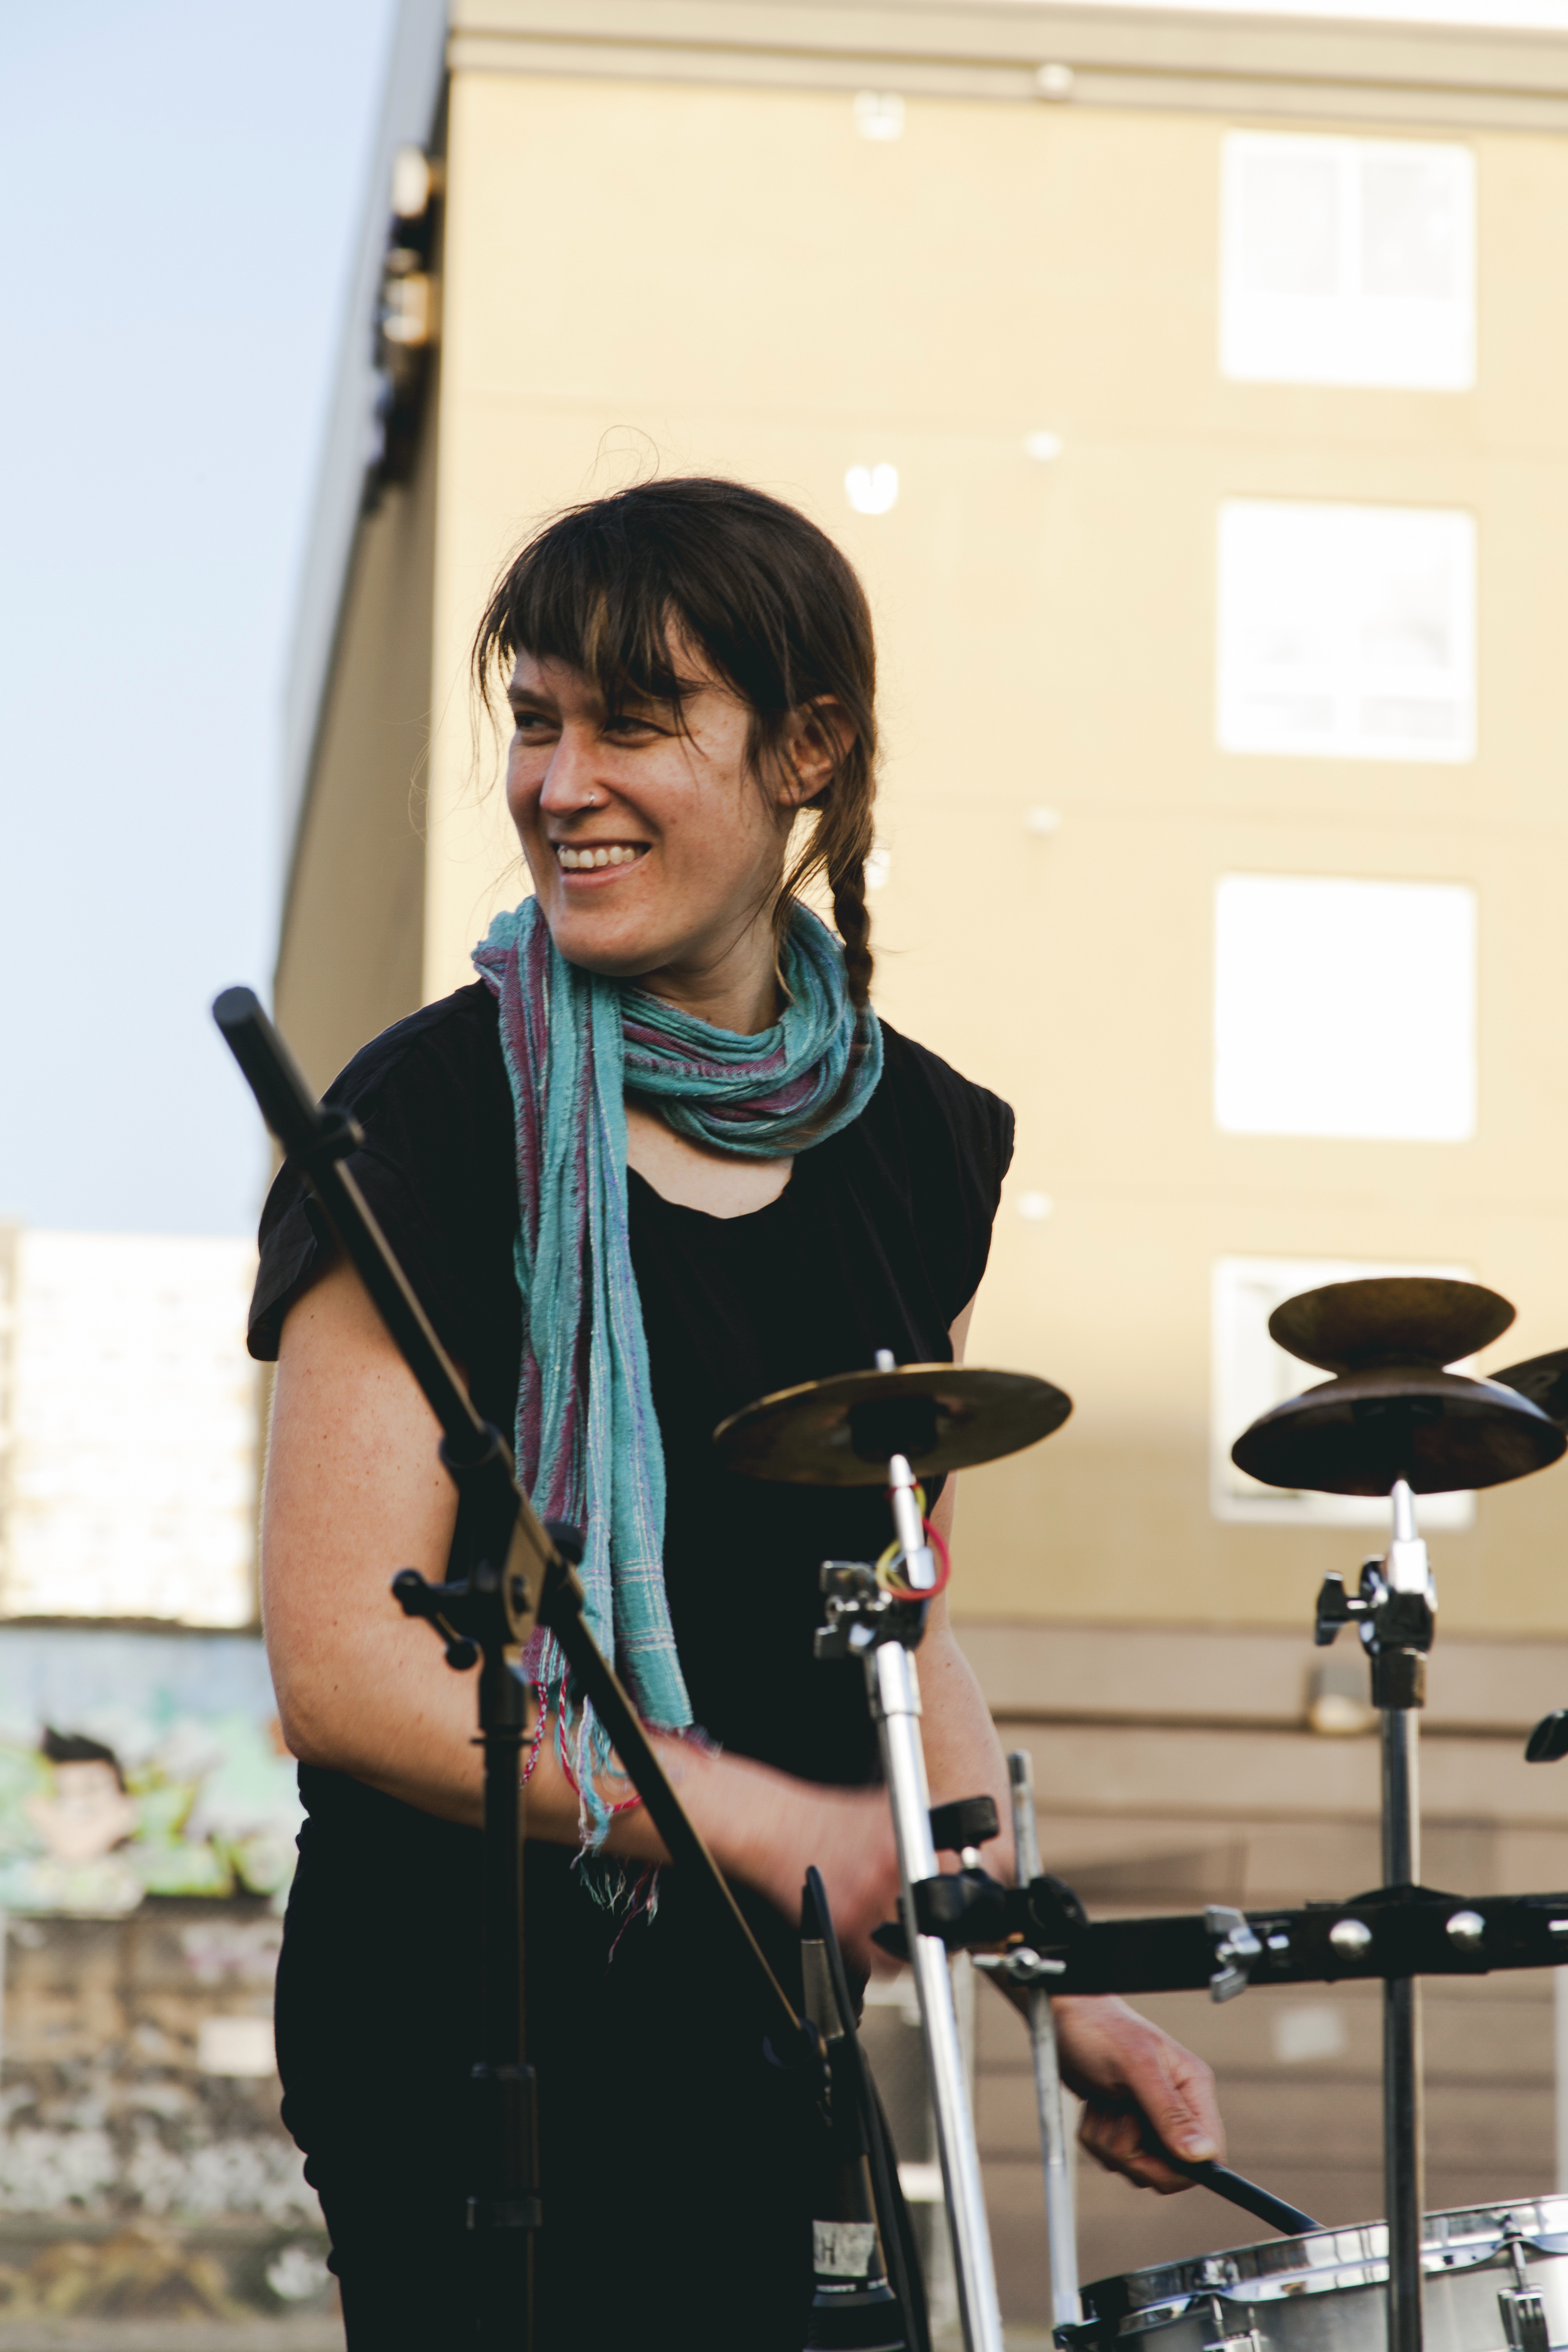 Musician, artist and natural historian, Lisa Schonberg plays for ALL RISE